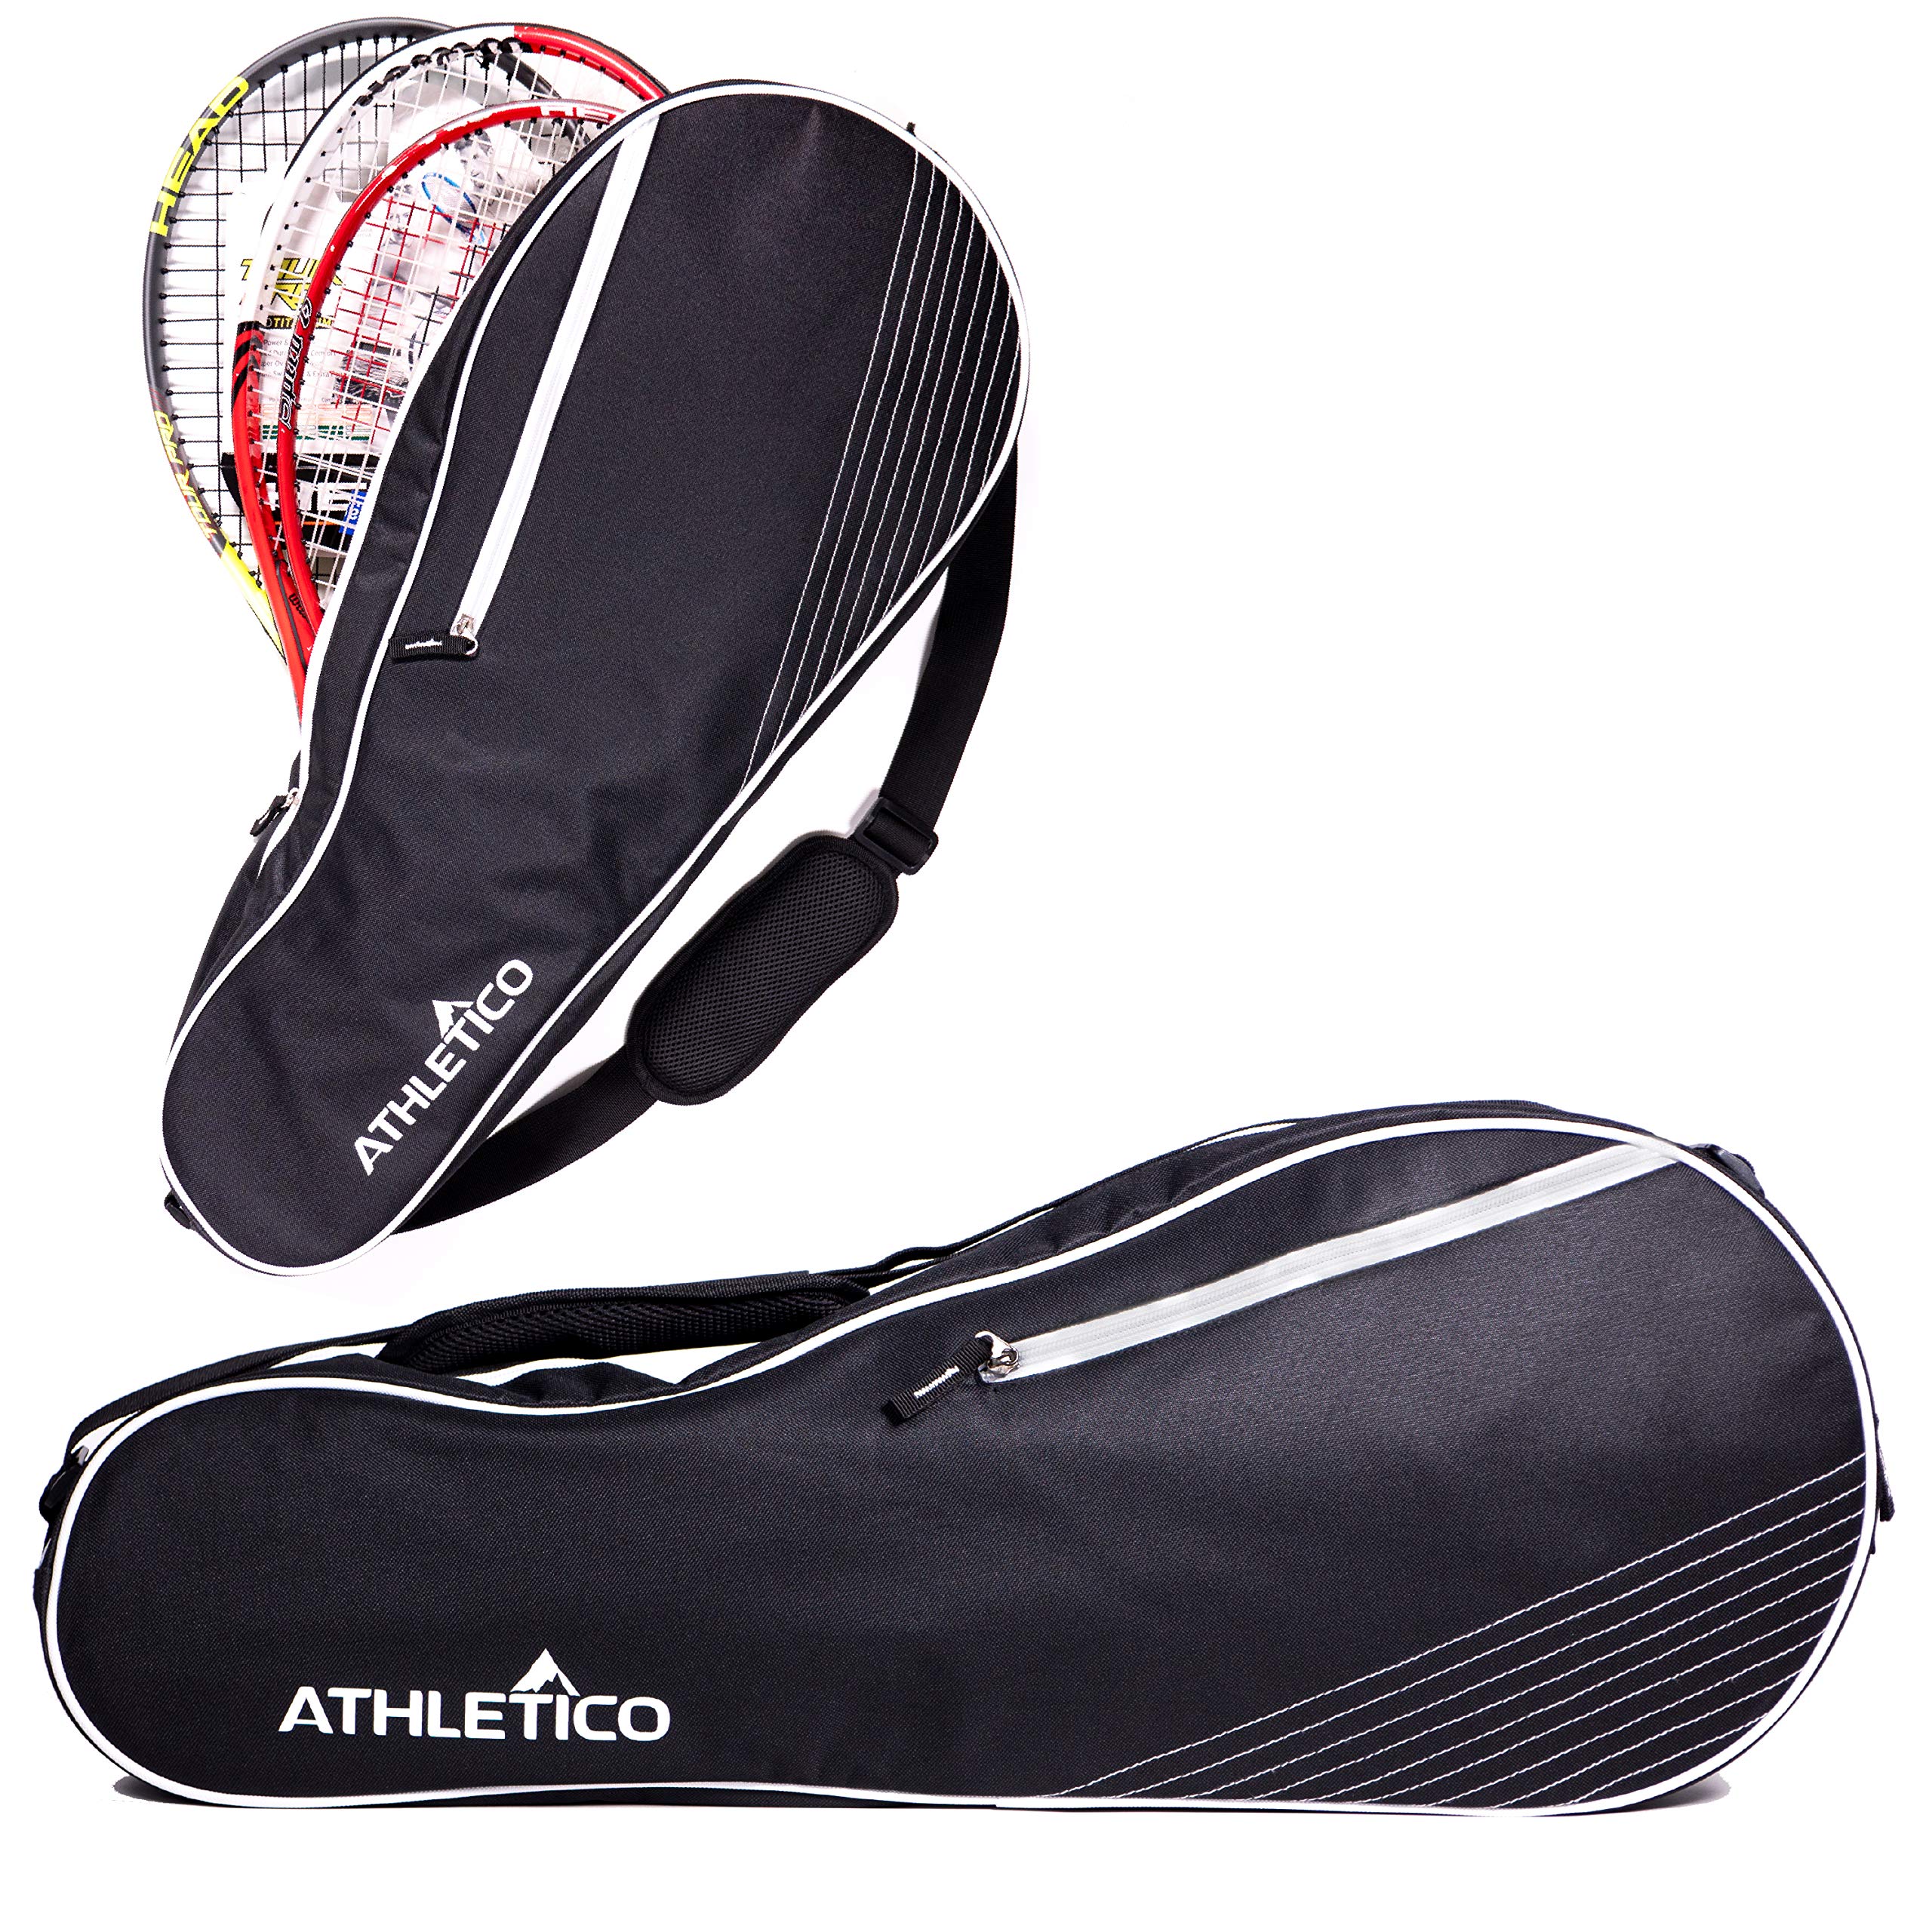 Athletico 3 Racquet Tennis Bag | Padded to Protect Rackets & Lightweight | Professional or Beginner Tennis Players | Unisex Design for Men, Women, Youth and Adults  - Acceptable